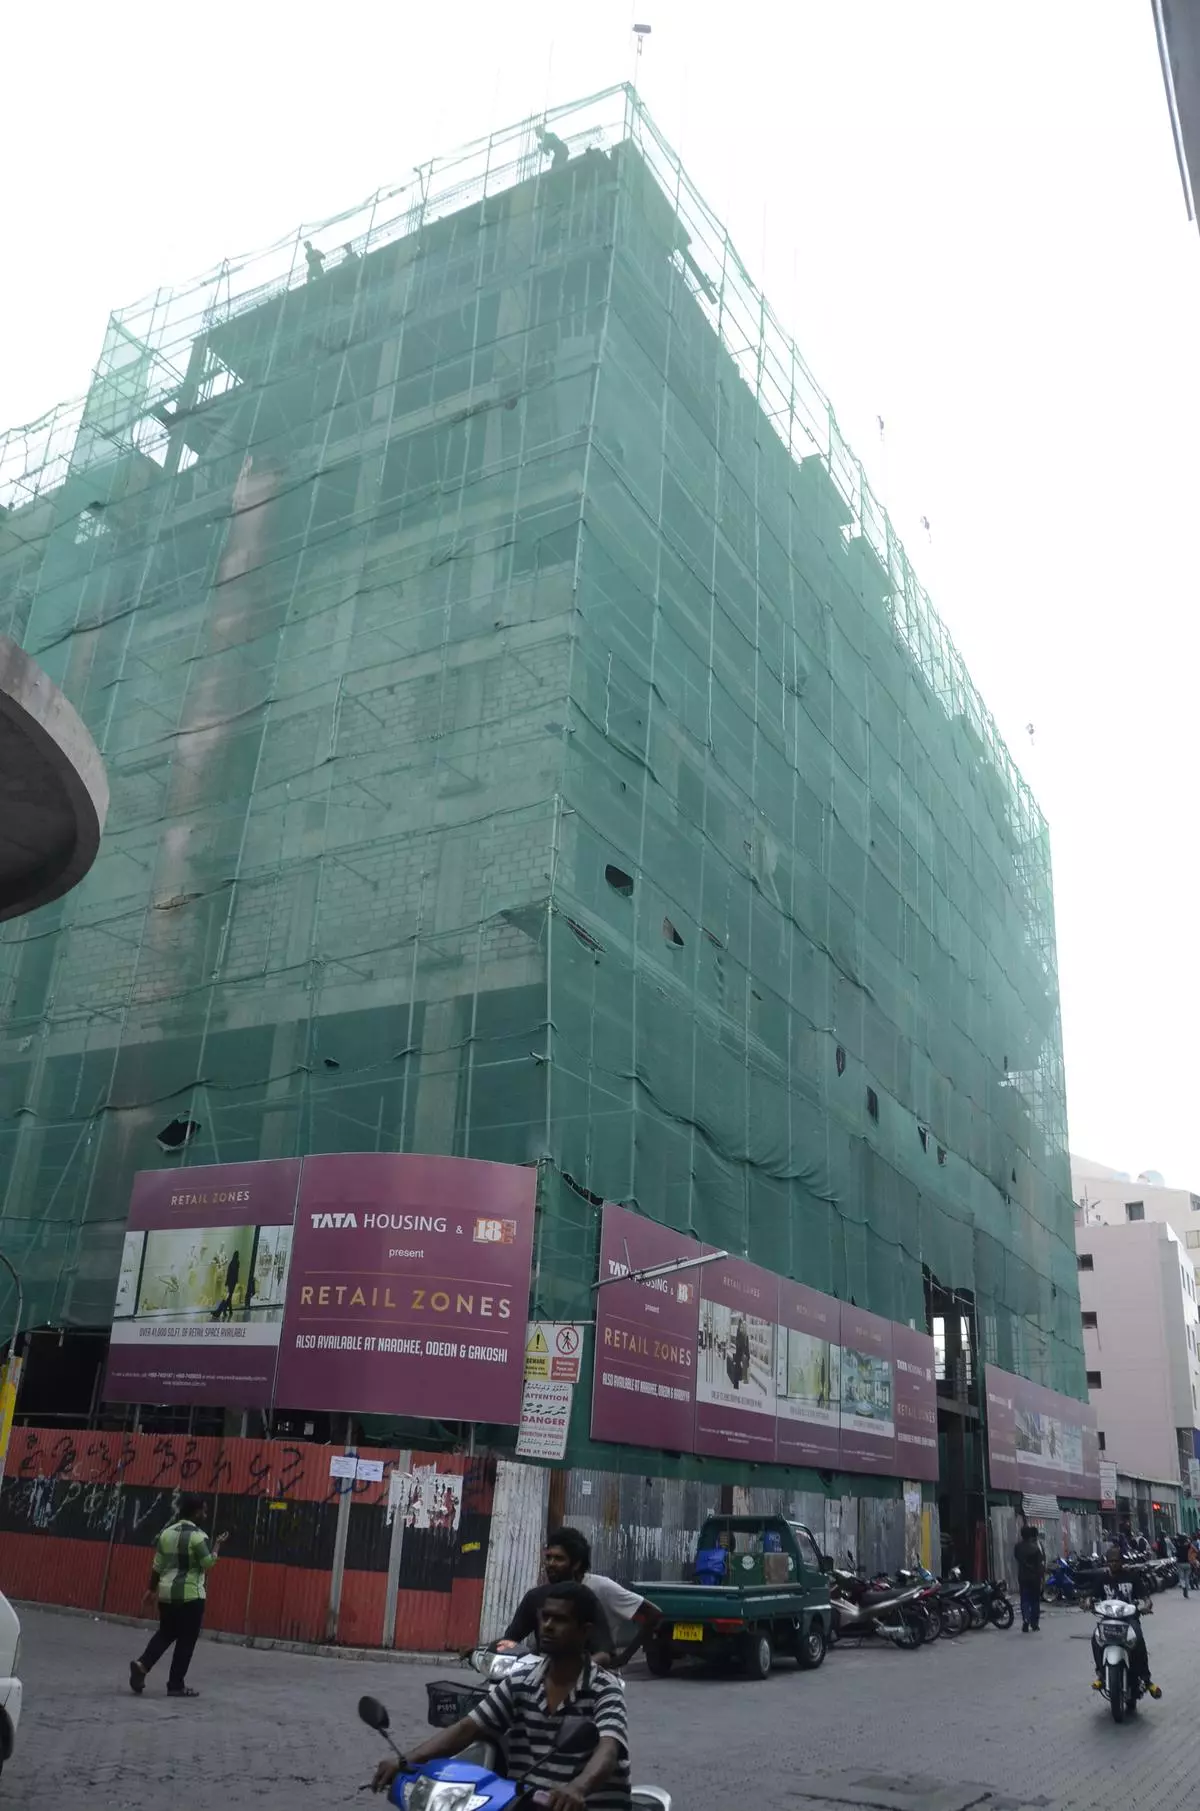 A Tata Housing residence-cum commercial complex being built in Male in 2012.